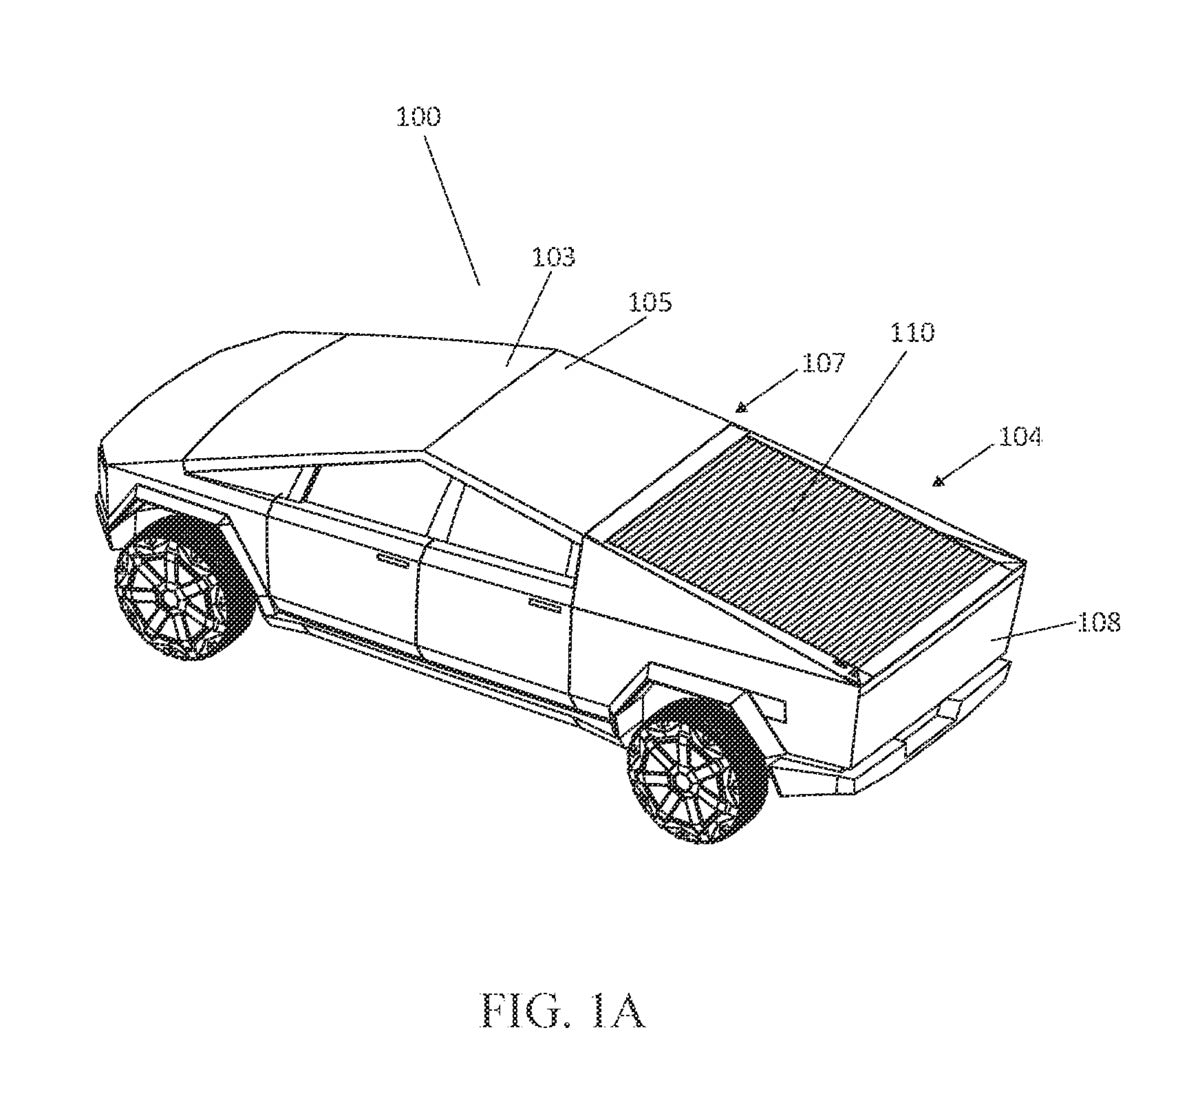 Tesla Cybertruck Will Have Optional Solar Panels According to Patent